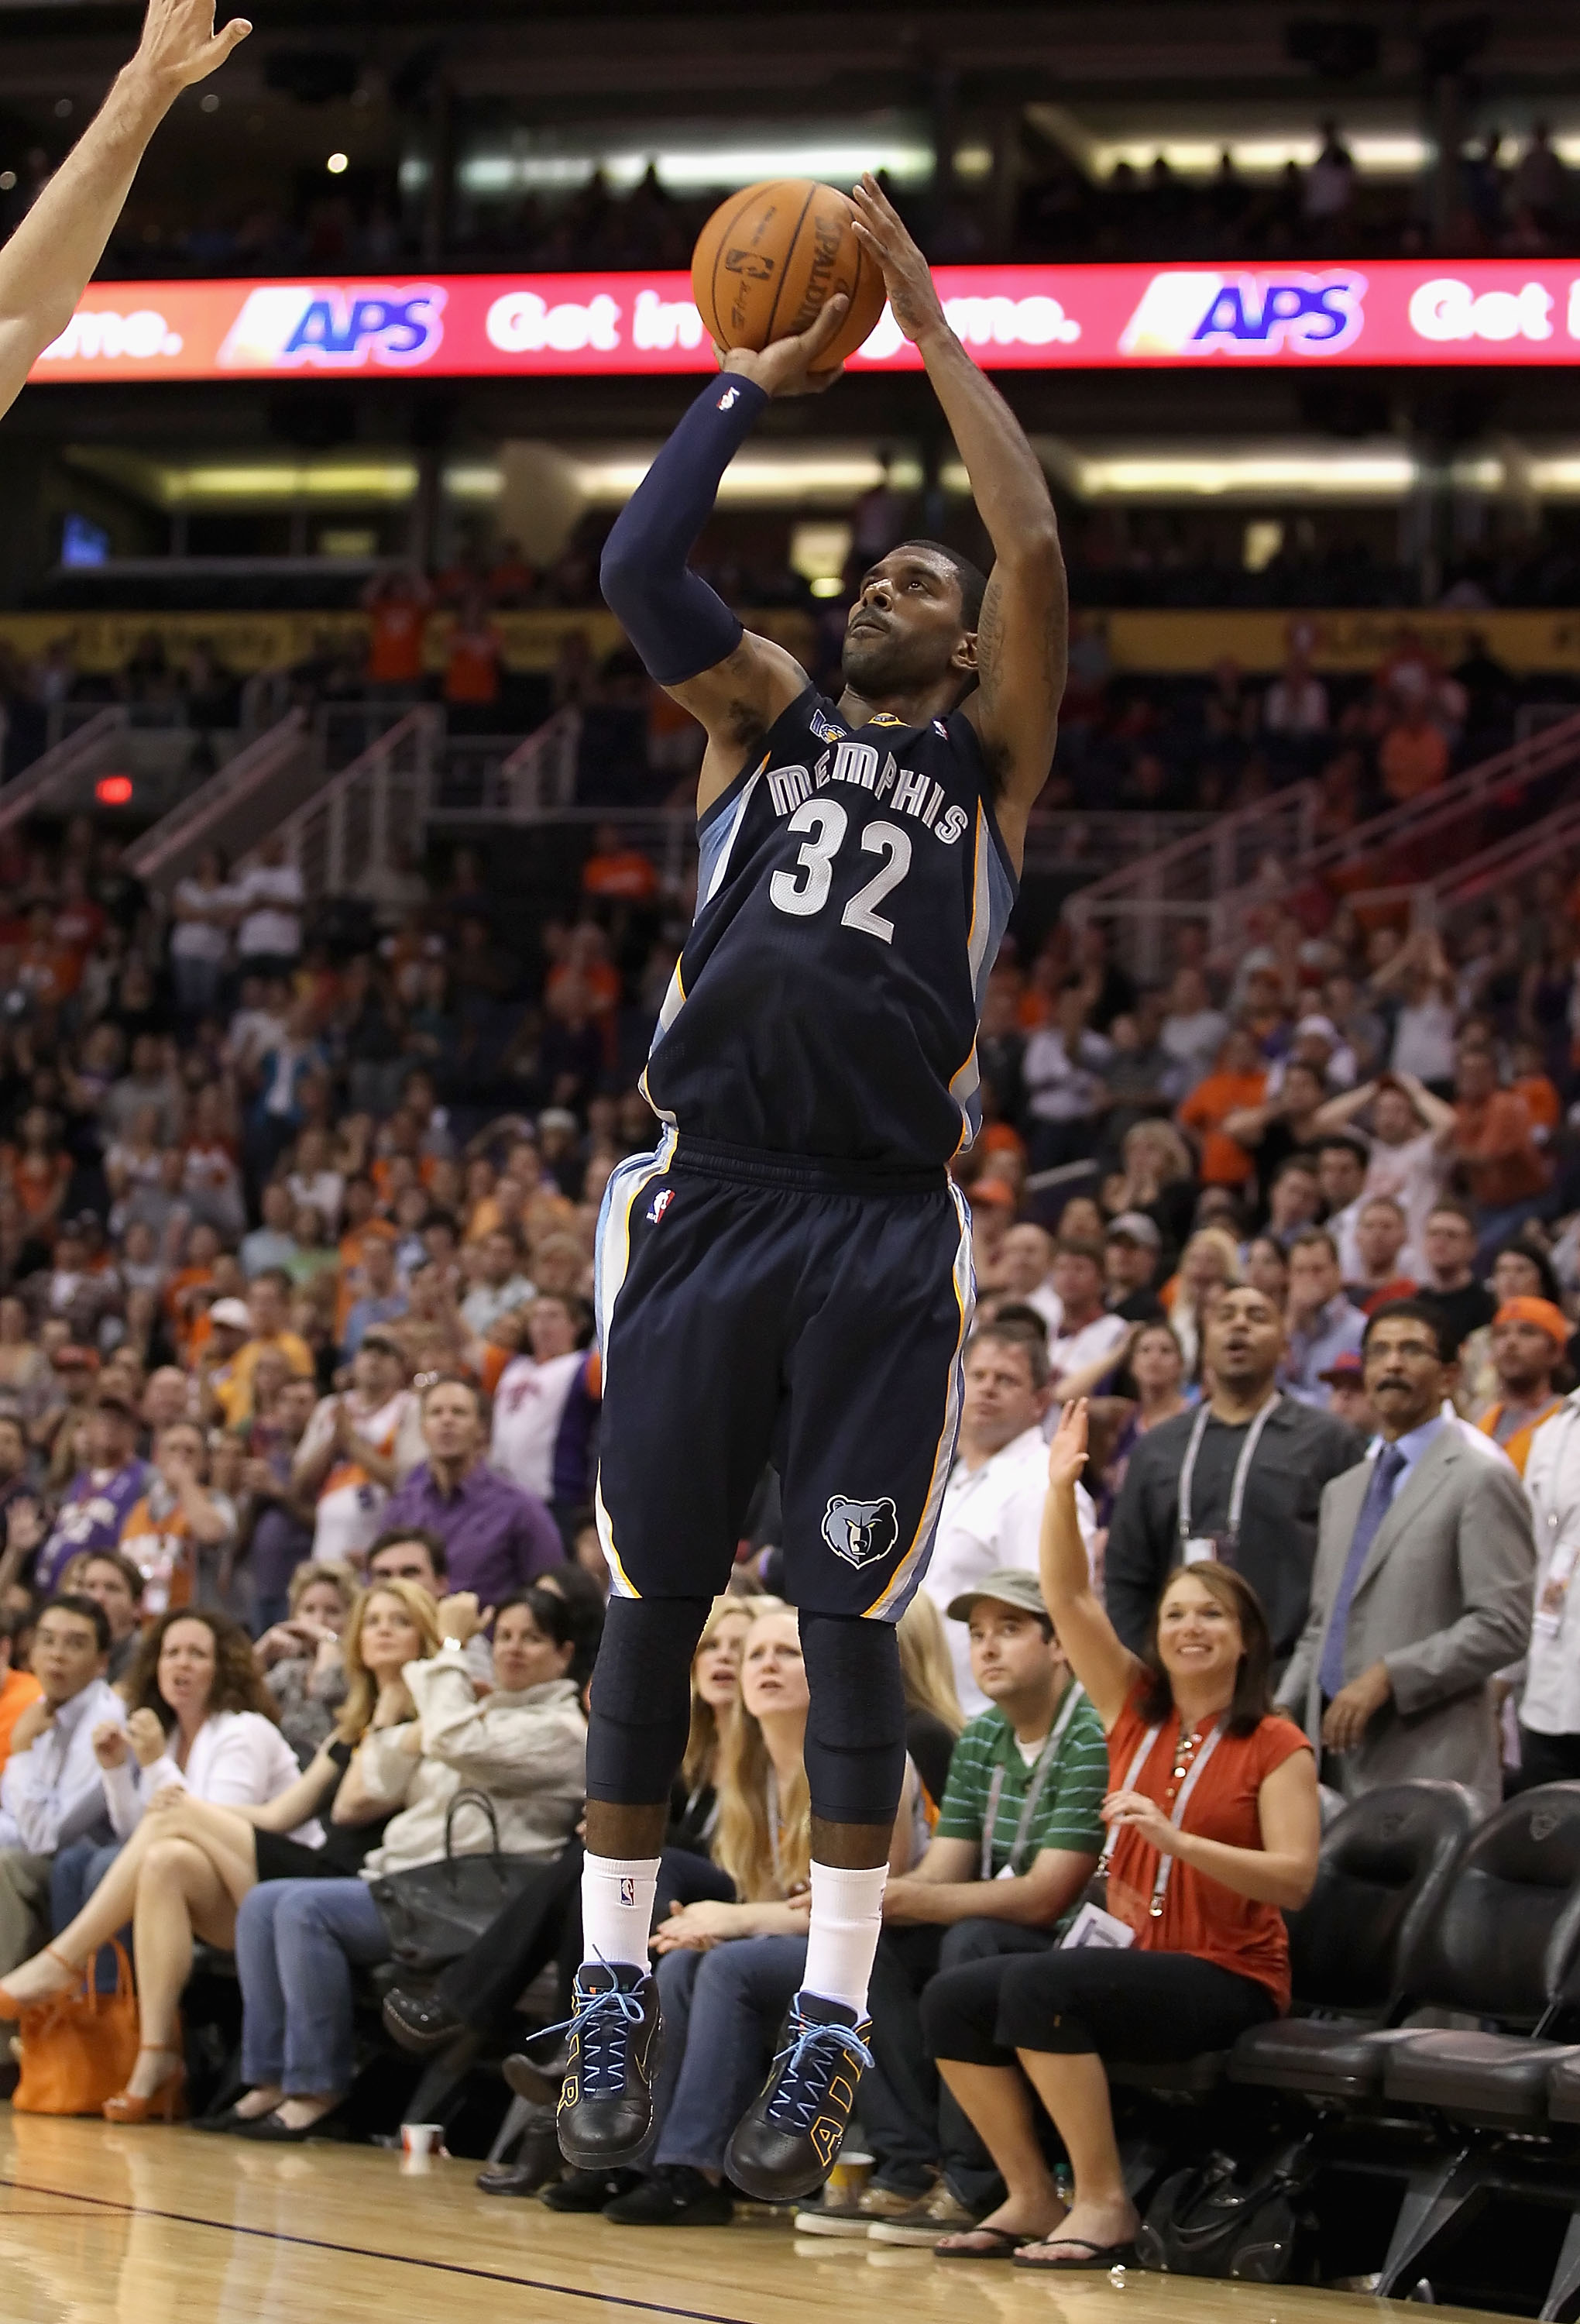 PHOENIX - NOVEMBER 05:  O.J. Mayo #32 of the Memphis Grizzlies puts up a shot during the NBA game against the Phoenix Suns at US Airways Center on November 5, 2010 in Phoenix, Arizona. NOTE TO USER: User expressly acknowledges and agrees that, by download